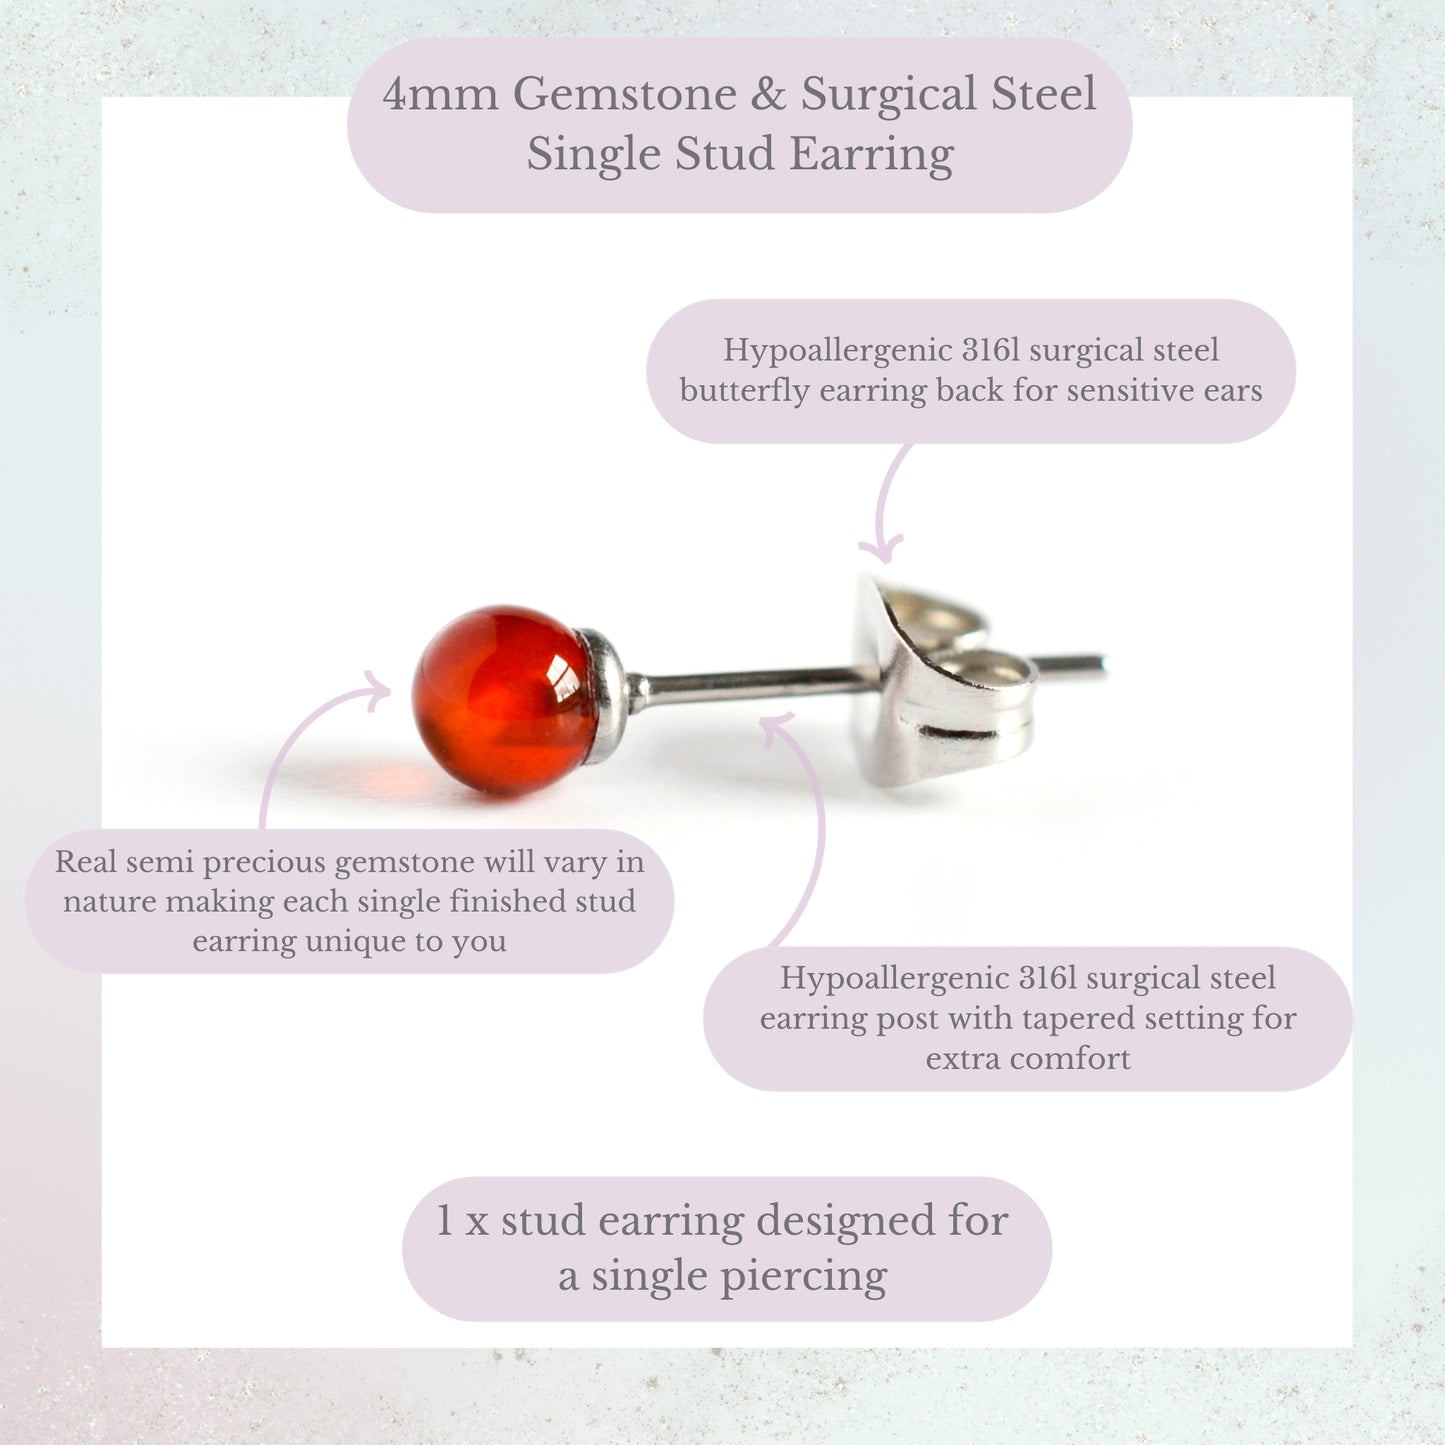 4mm gemstone & surgical steel single stud earring product information graphic